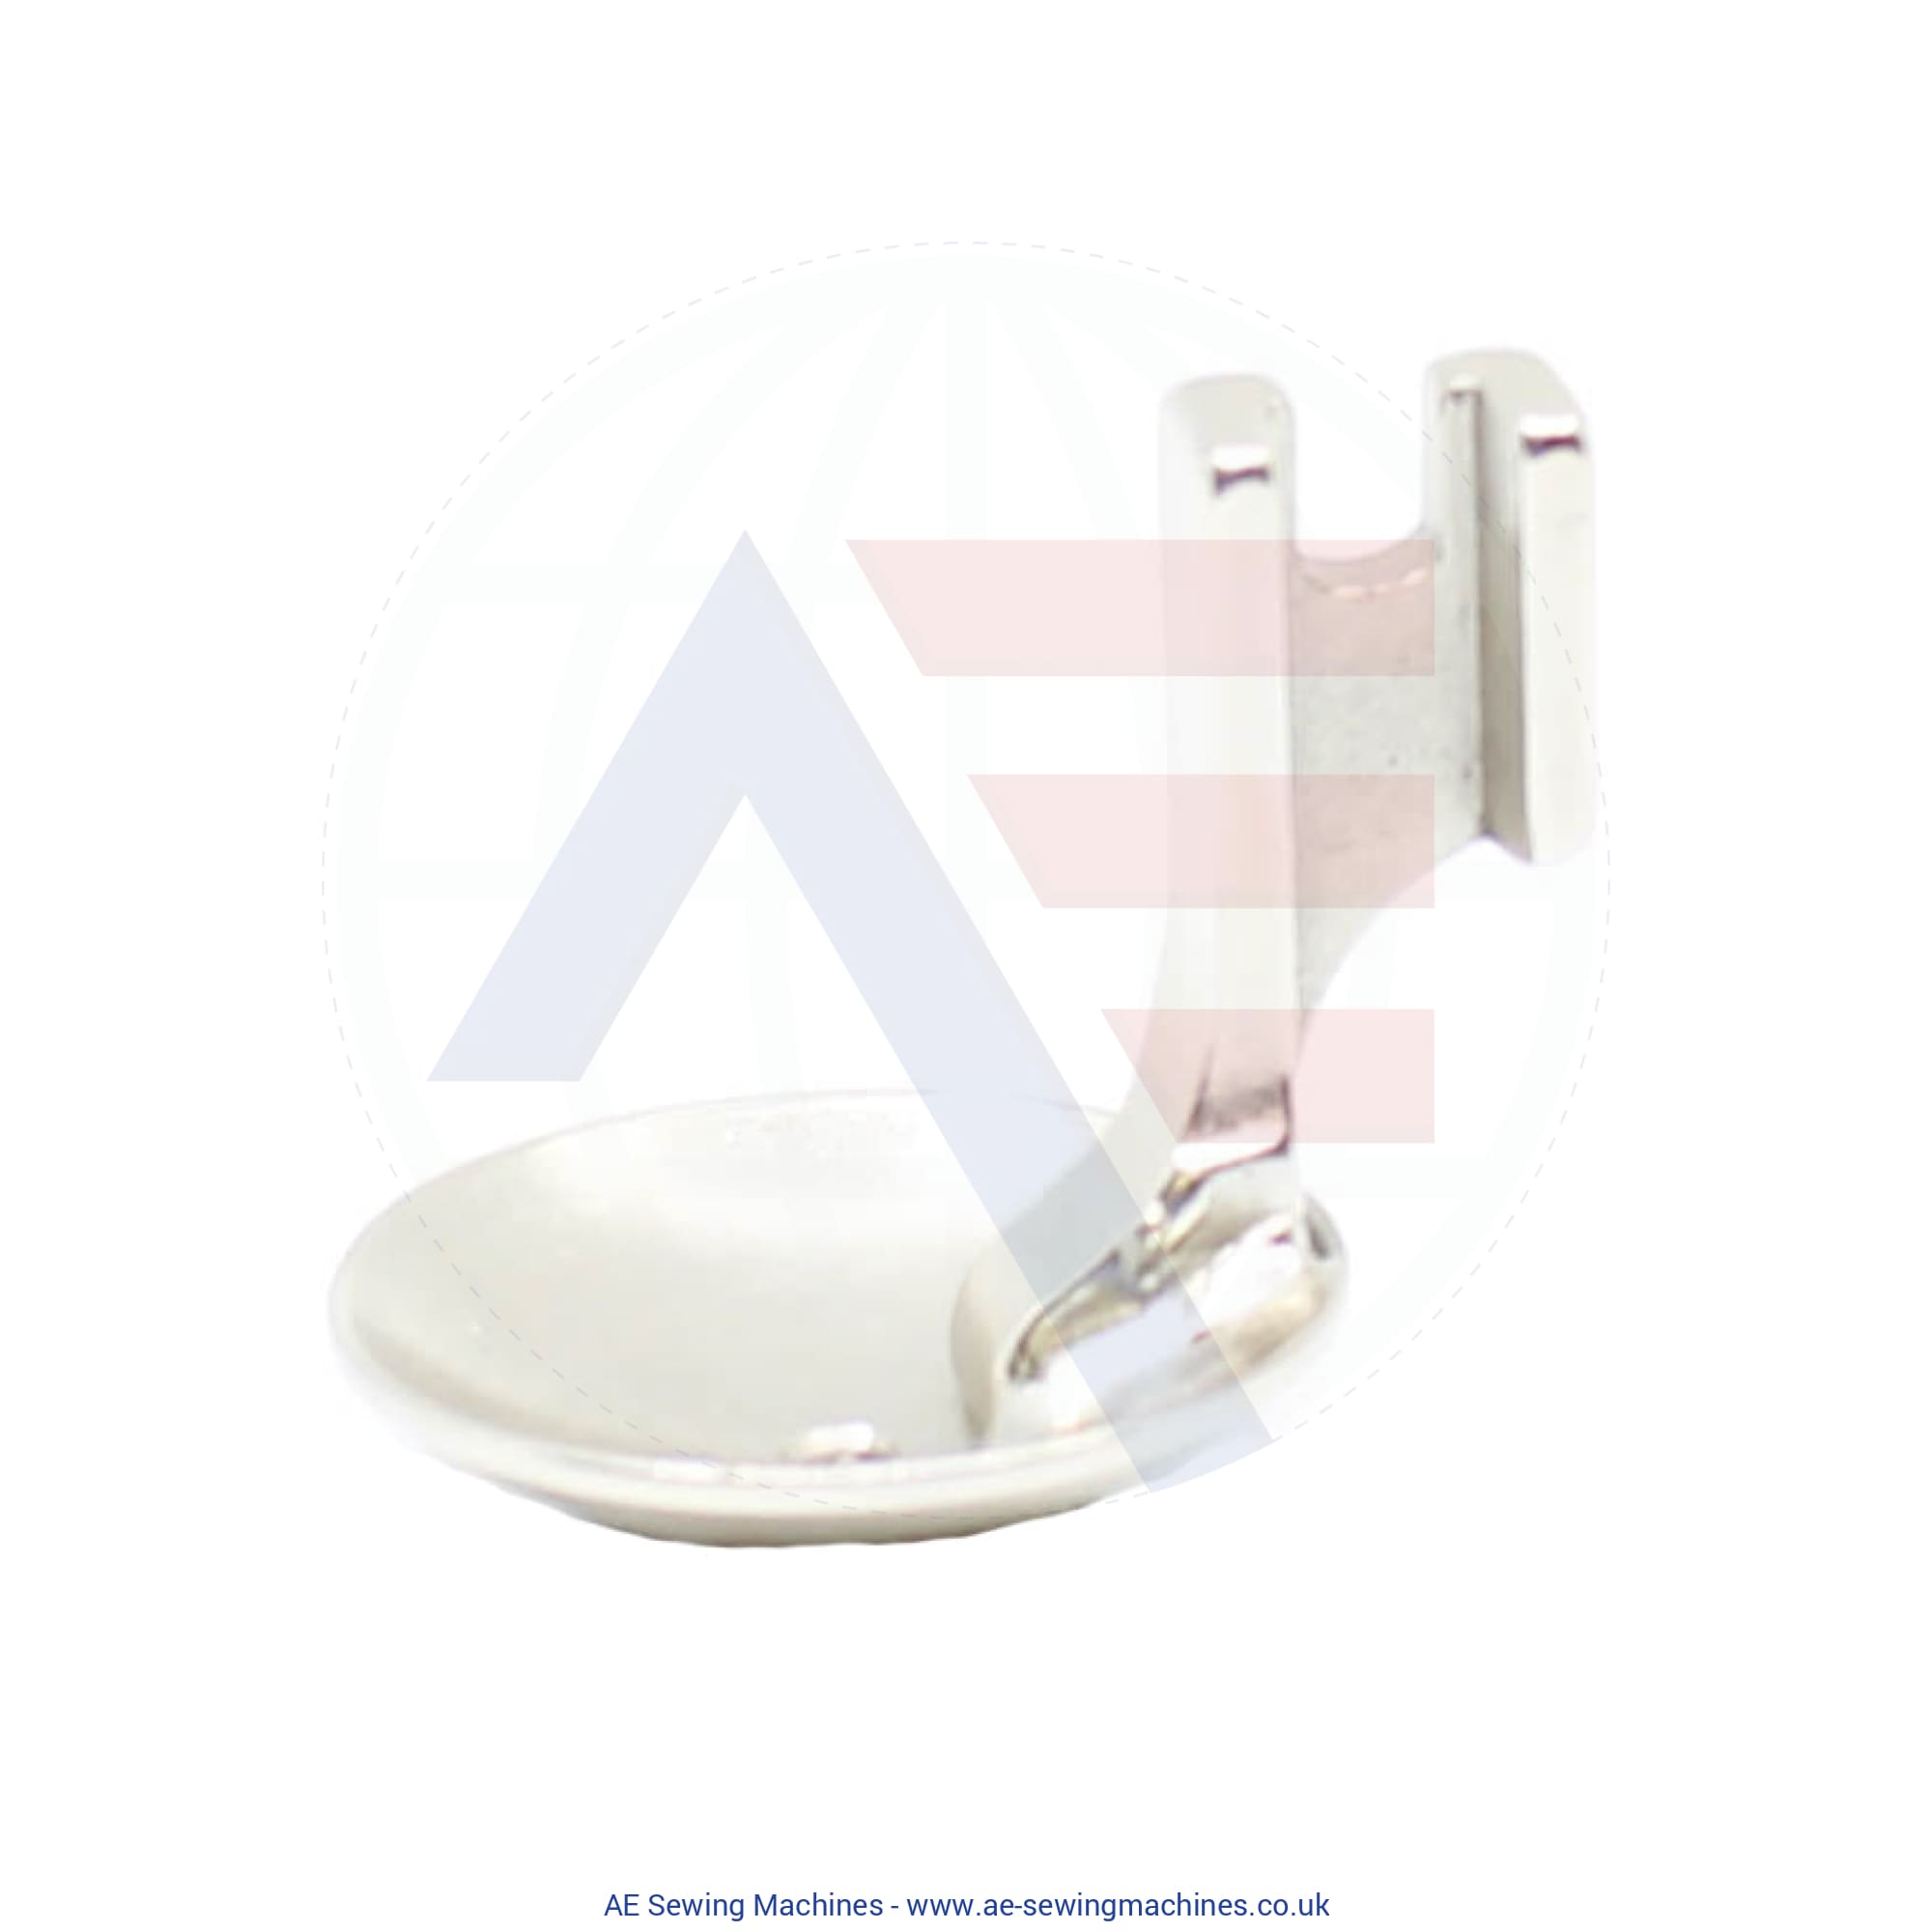 Qs1 Quilter Foot Sewing Machine Spare Parts